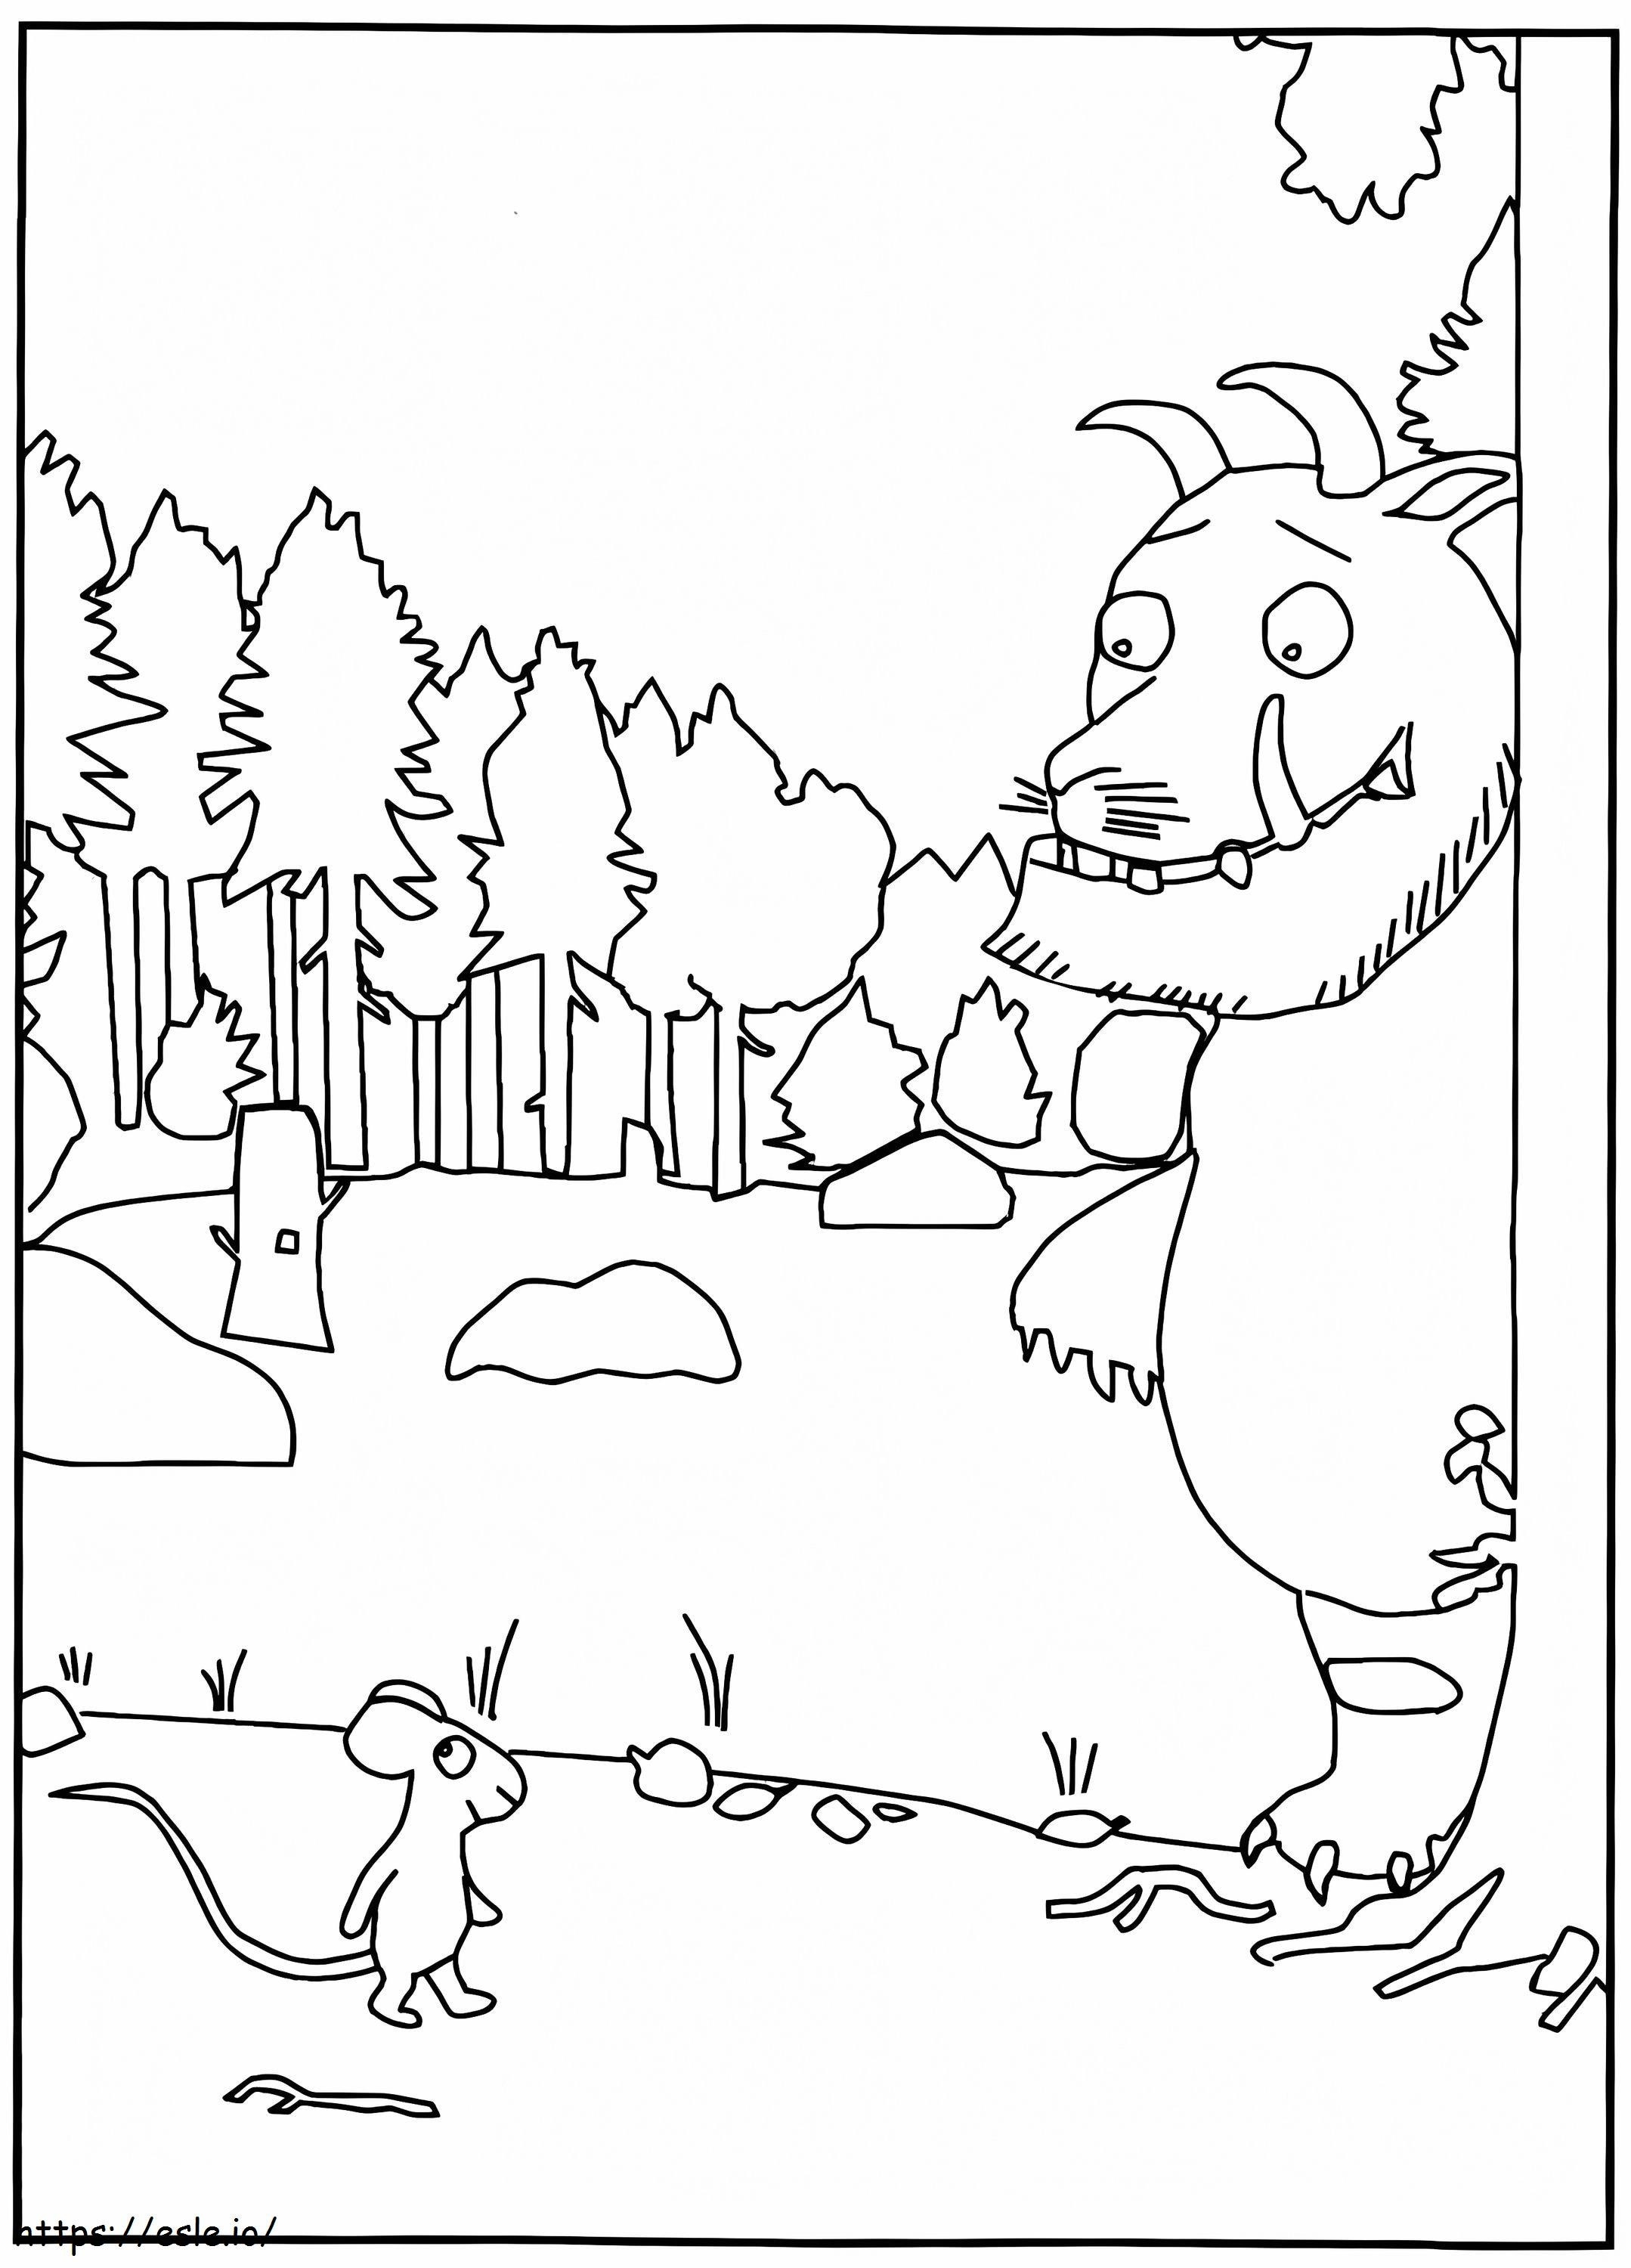 Gruffalo With Mouse coloring page